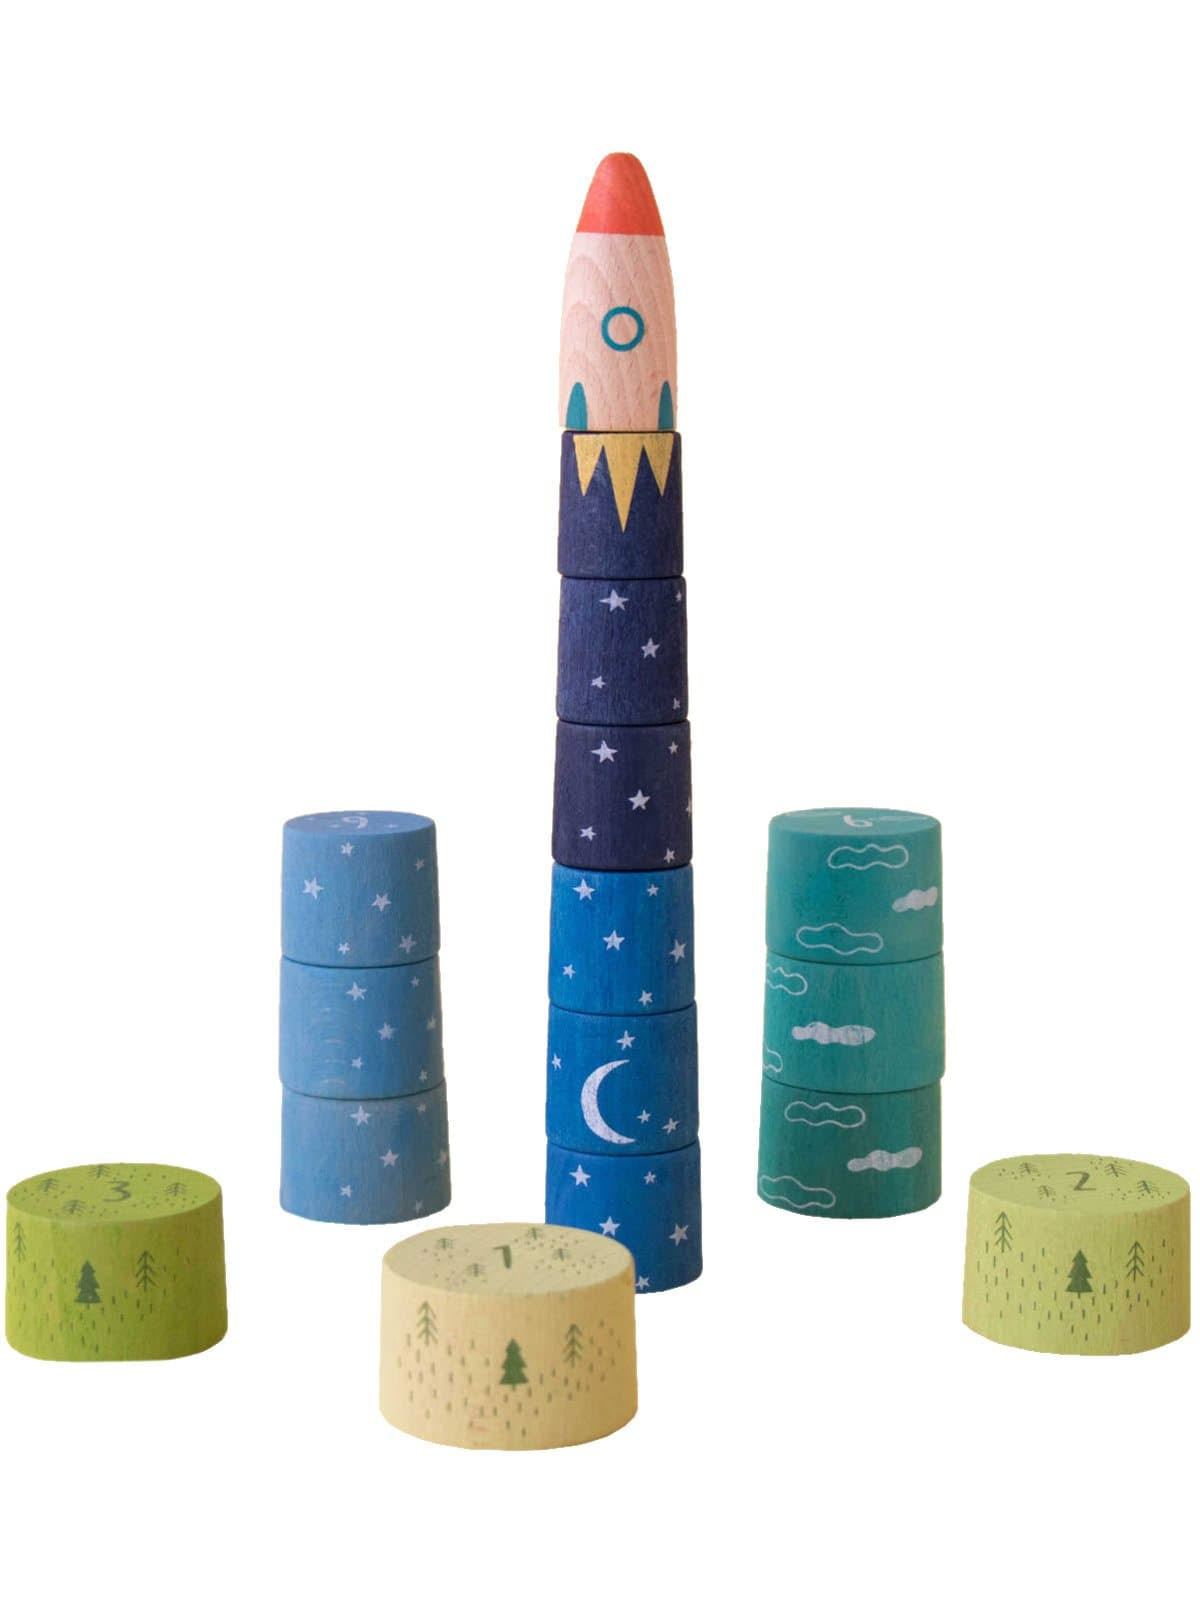 Up To The Stars Stacking Game